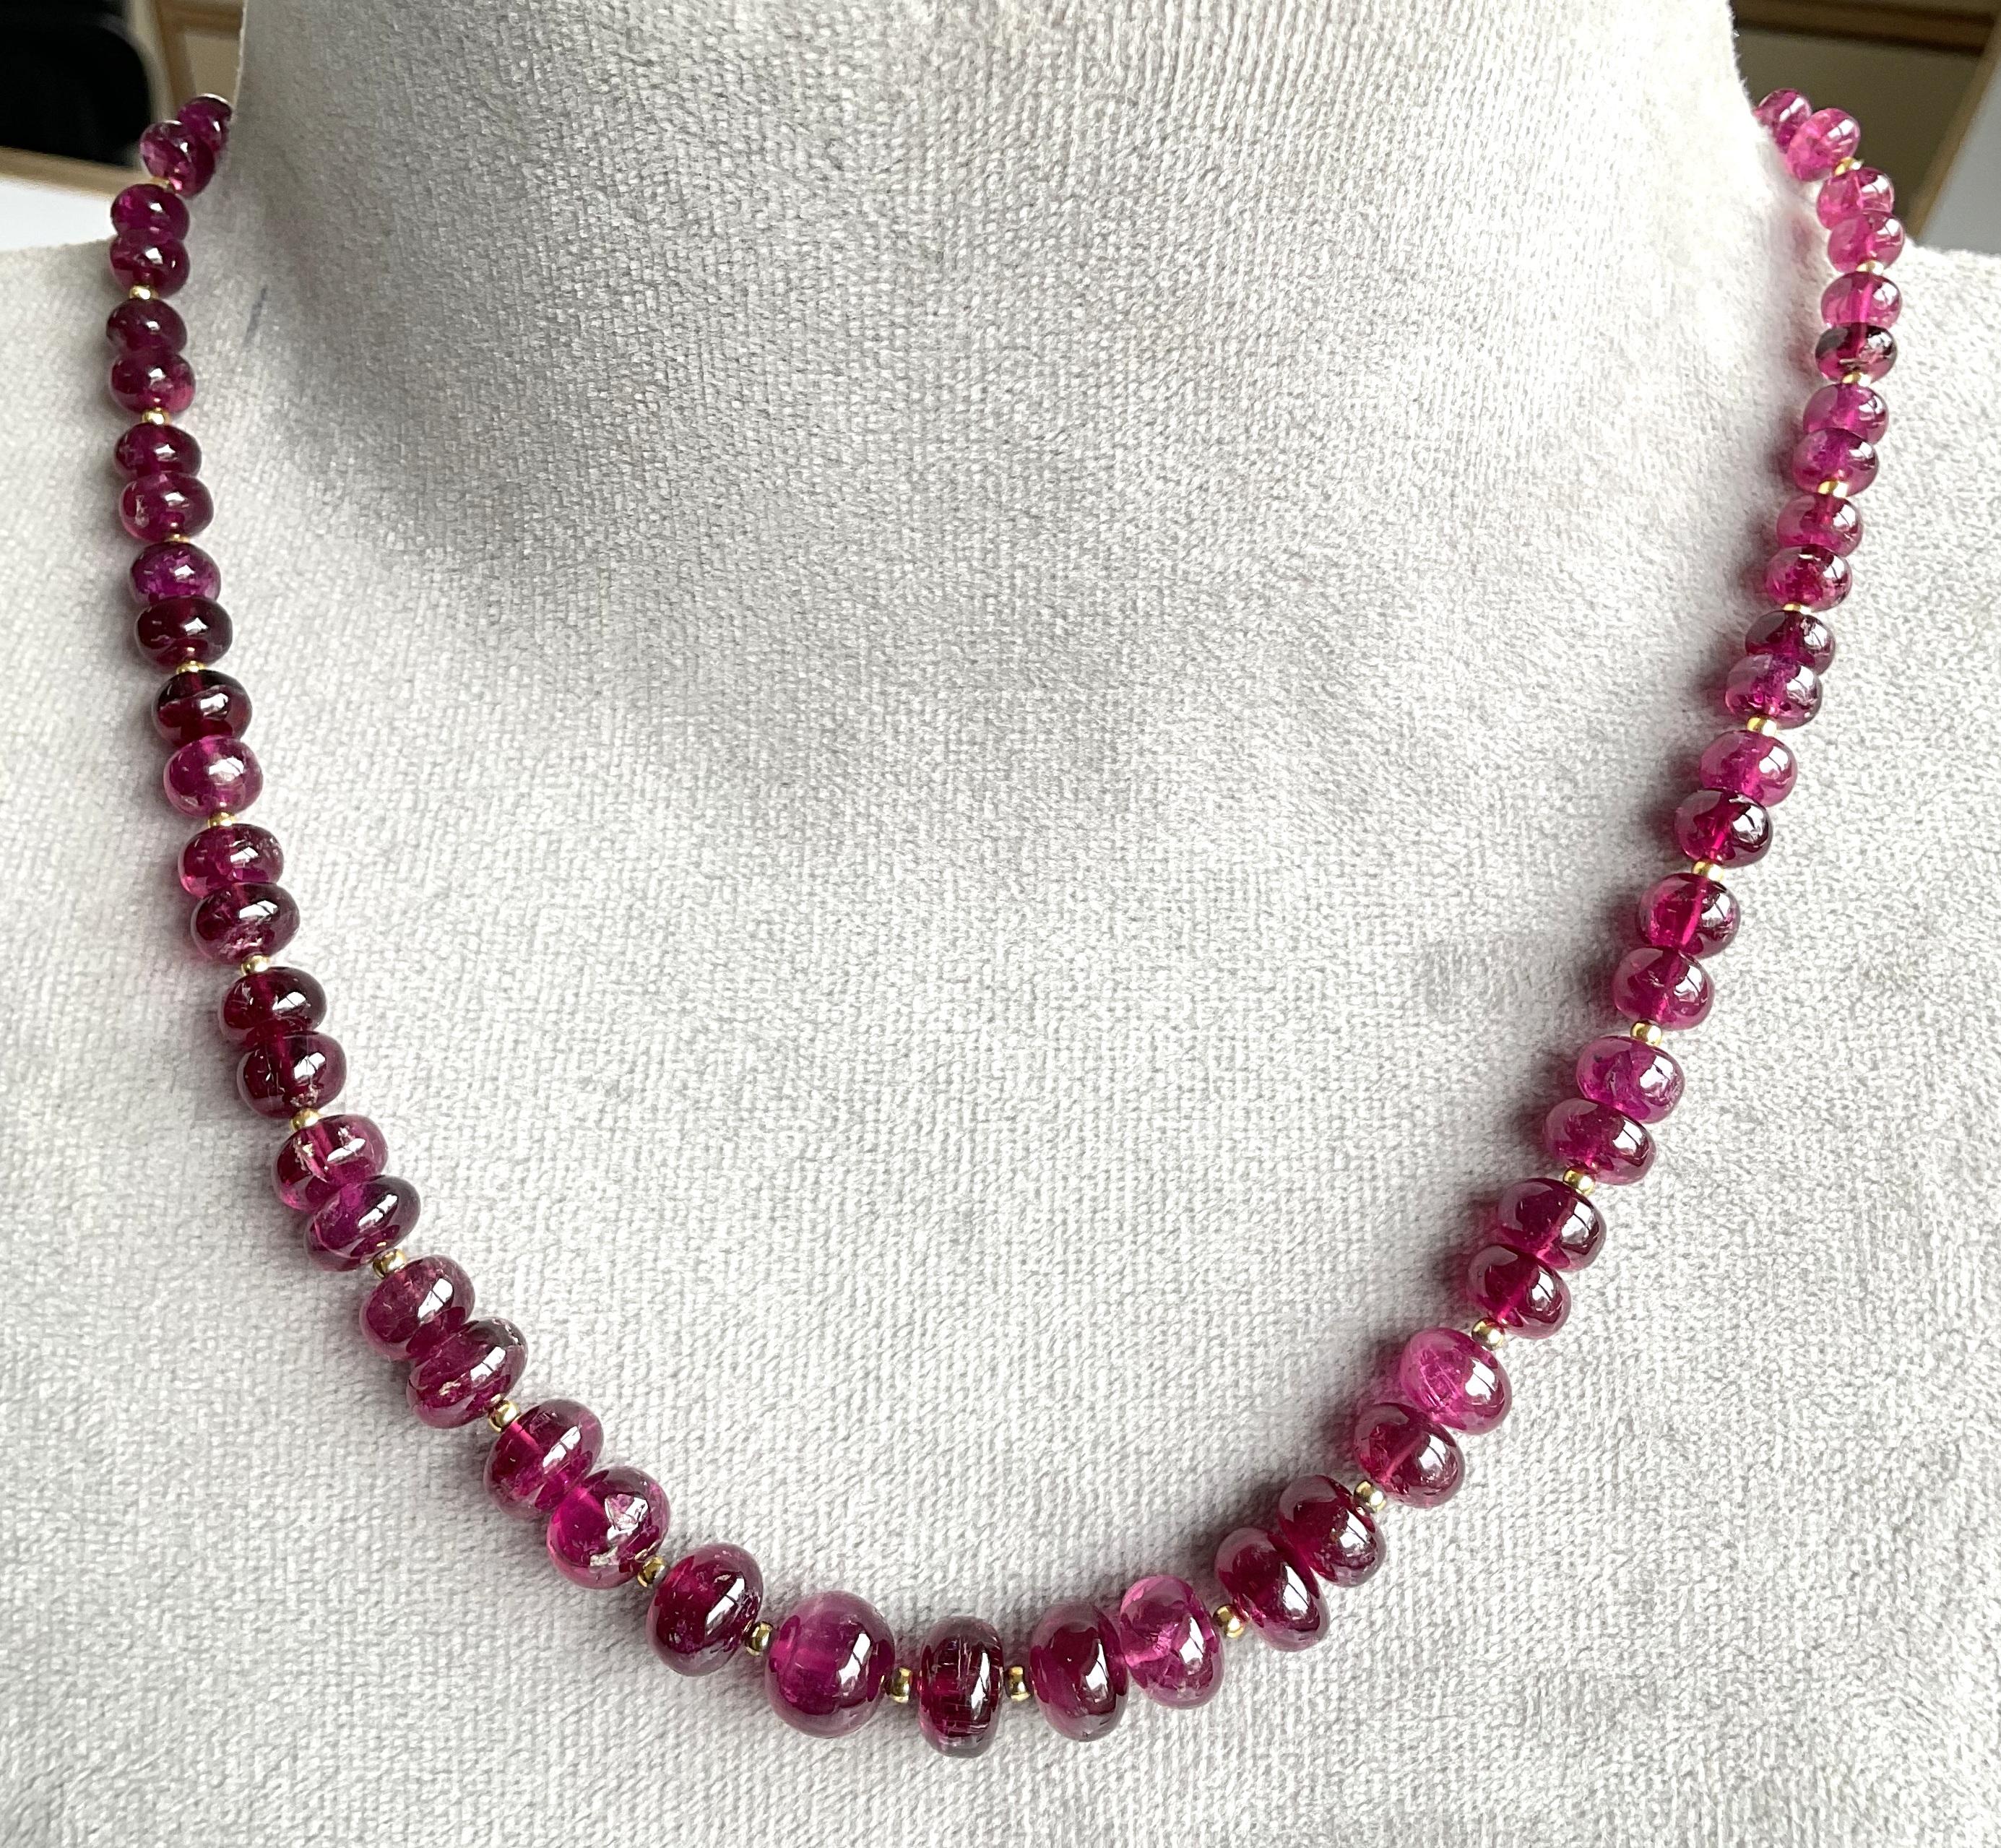 Women's or Men's 163.00 Carats Rubellite Tourmaline Necklace Fine Jewelry Natural Gemstone Beads For Sale